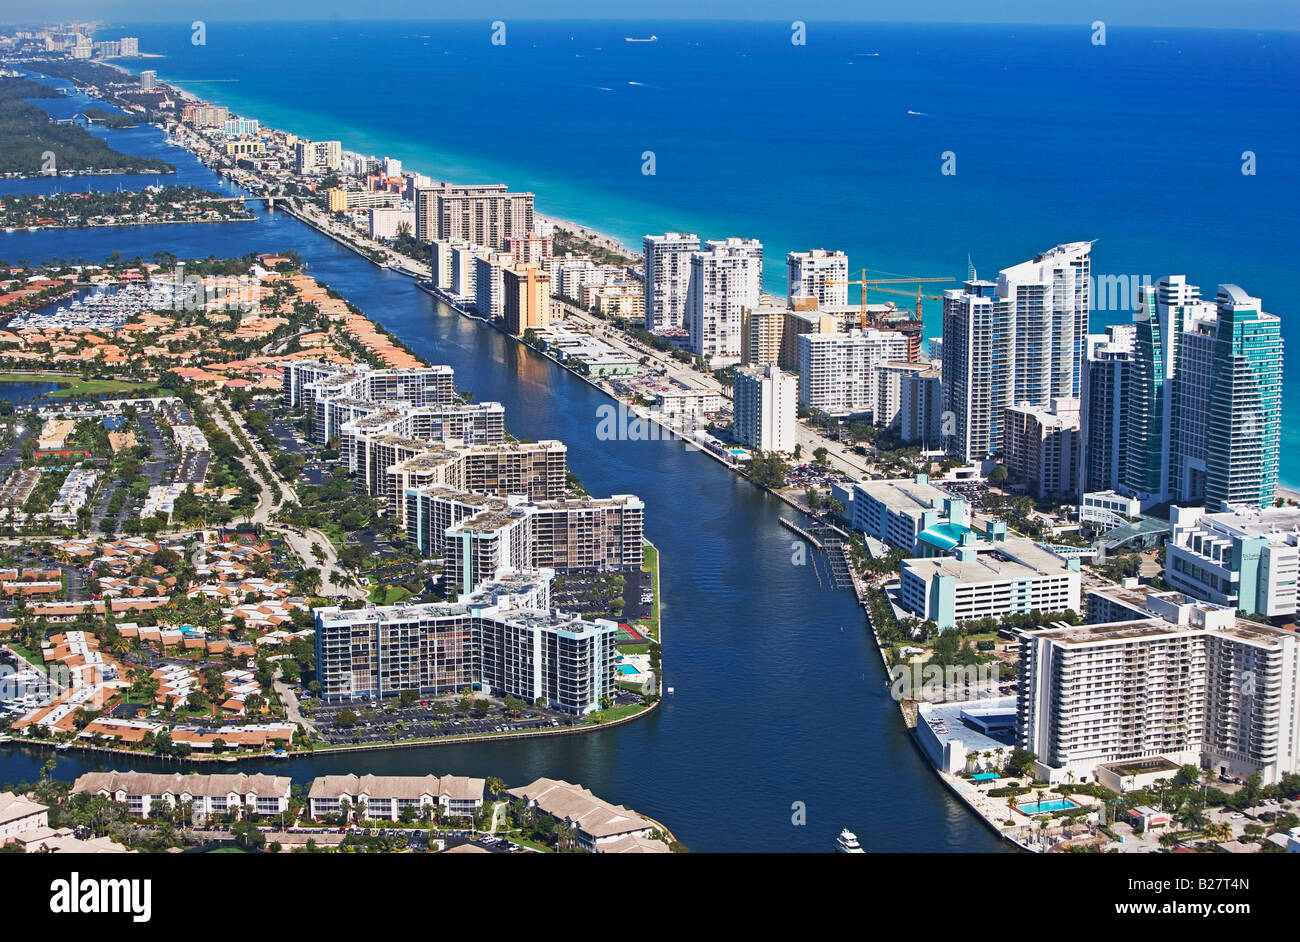 Aerial view of Fort Lauderdale, Florida, United States Stock Photo